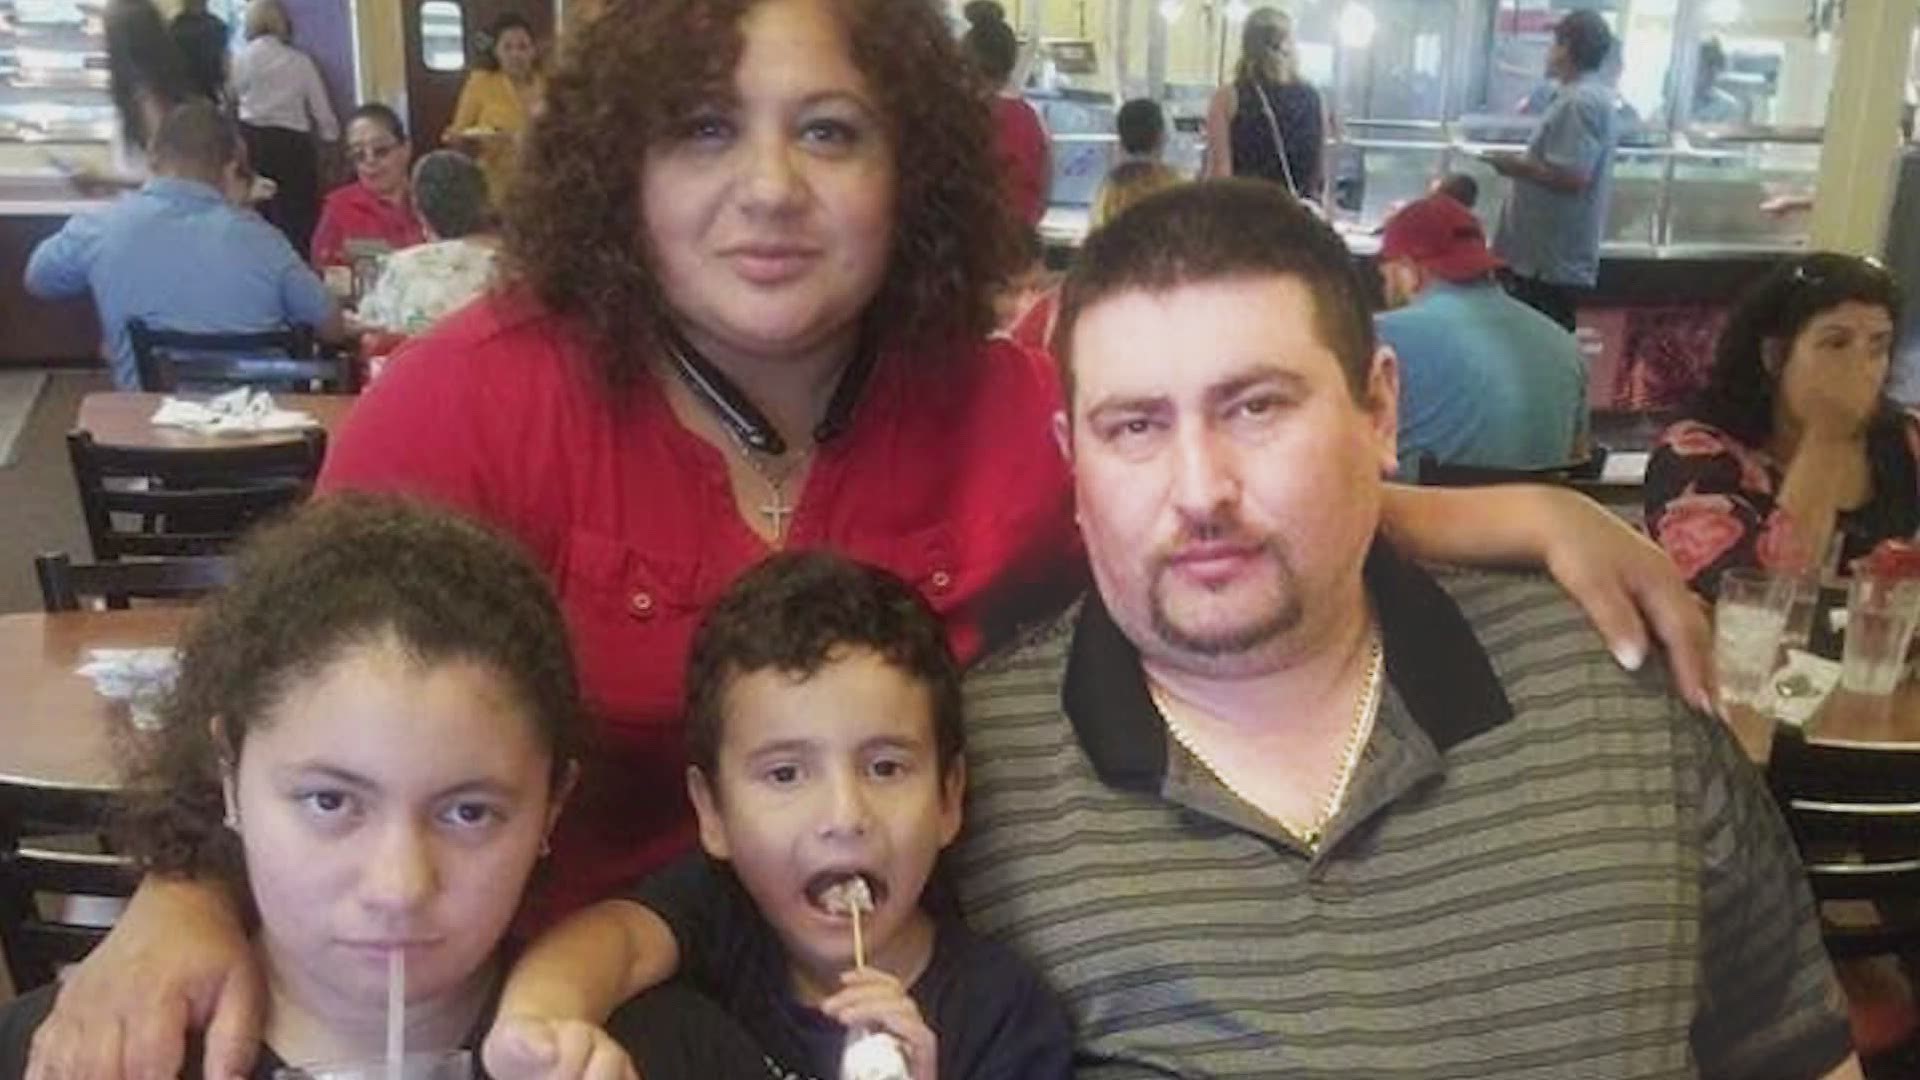 Hugo Dominguez died on April 25 after he contracted the disease at the West Dallas plant, the lawsuit alleges. The family claims the company was negligent.